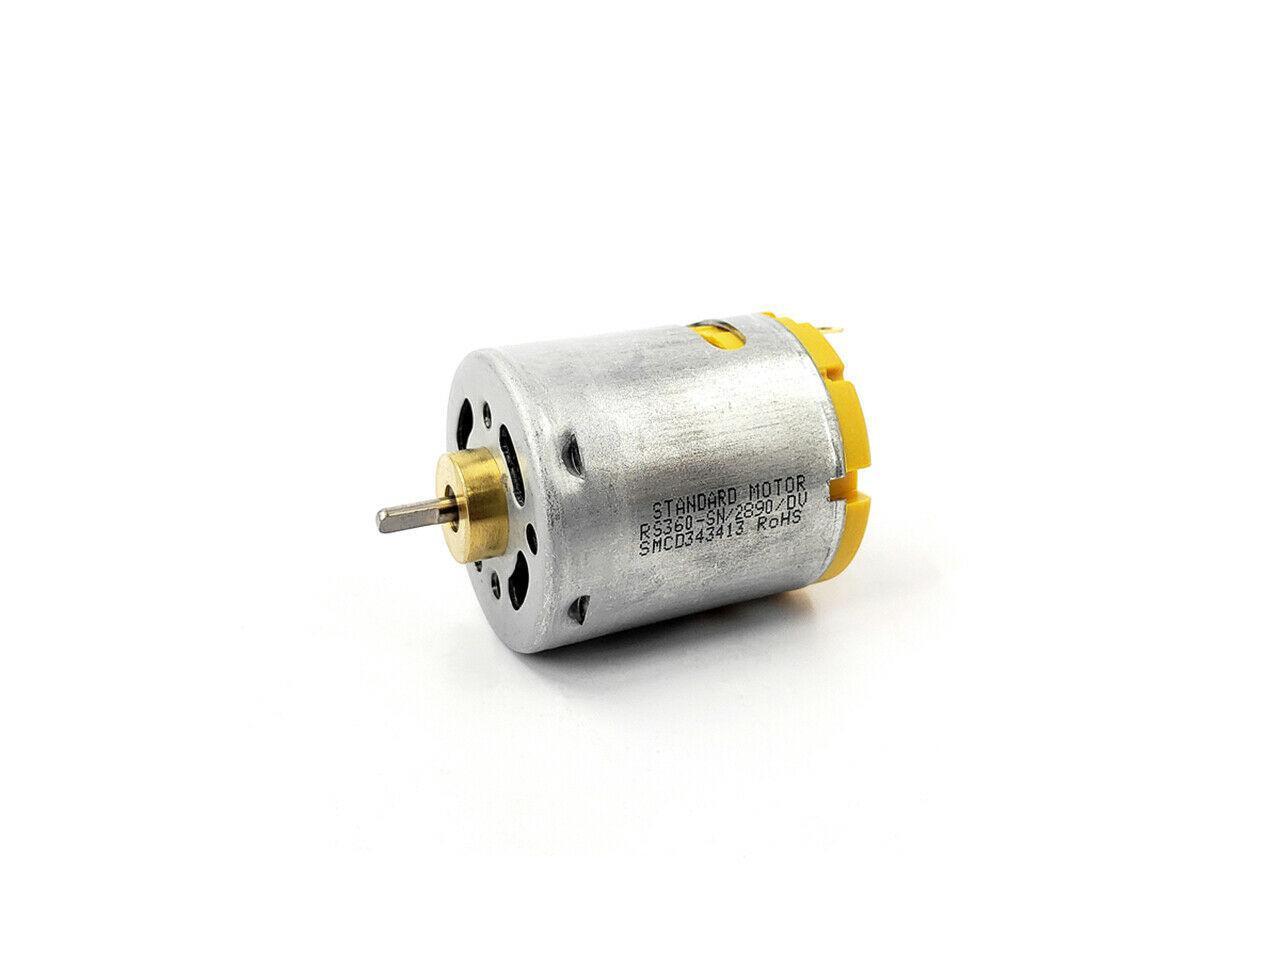 DC 12V-24V 17000RPM High Speed RK-365PH Motor with Long Worm Shaft for DIY Parts 